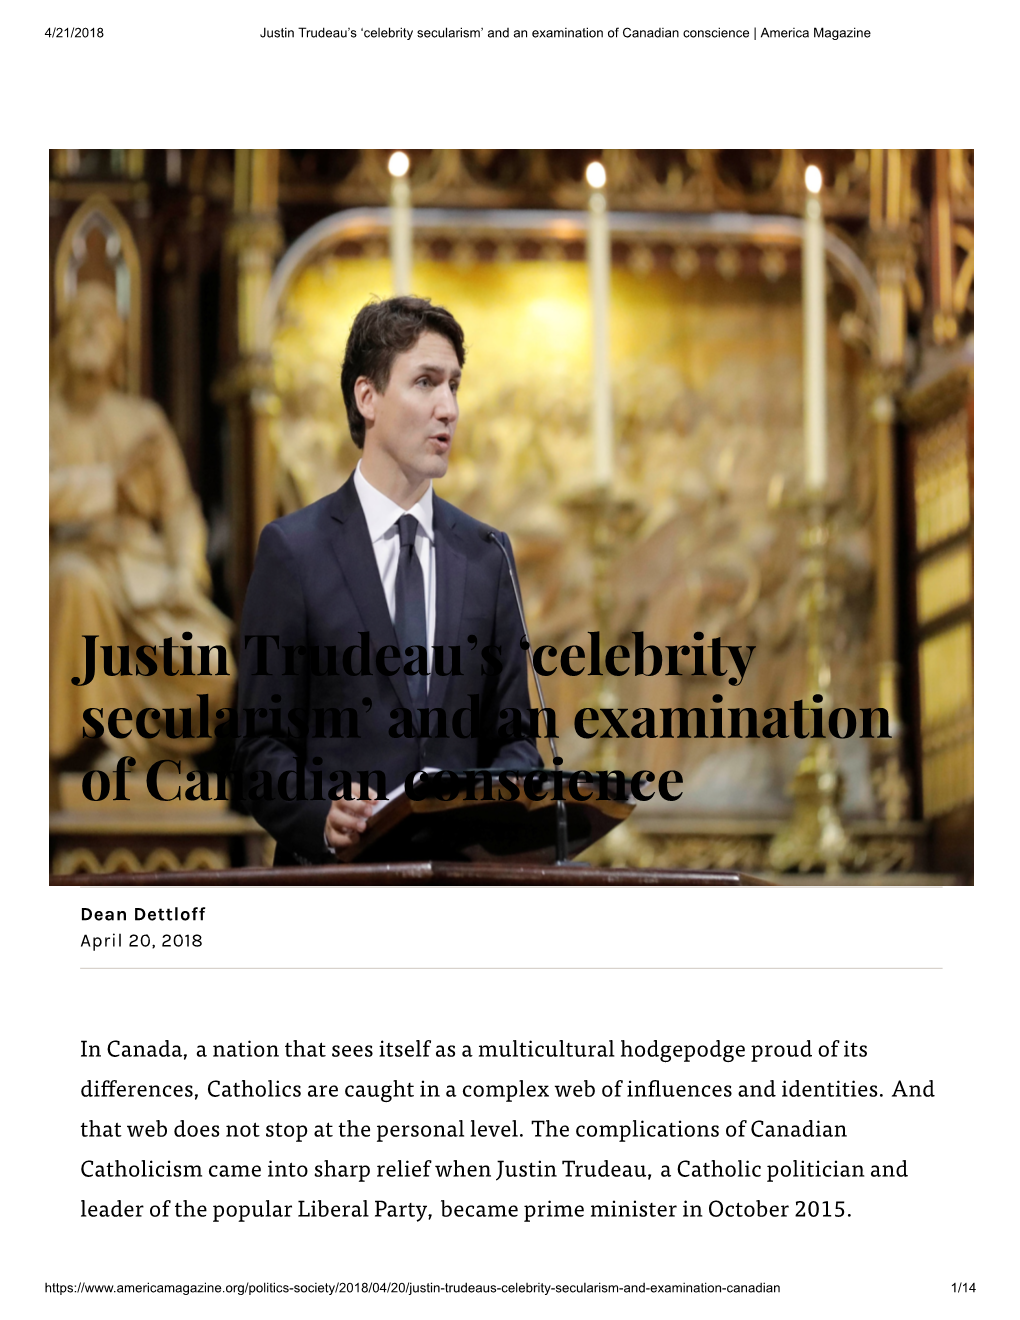 Justin Trudeau's 'Celebrity Secularism' and an Examination of Canadian